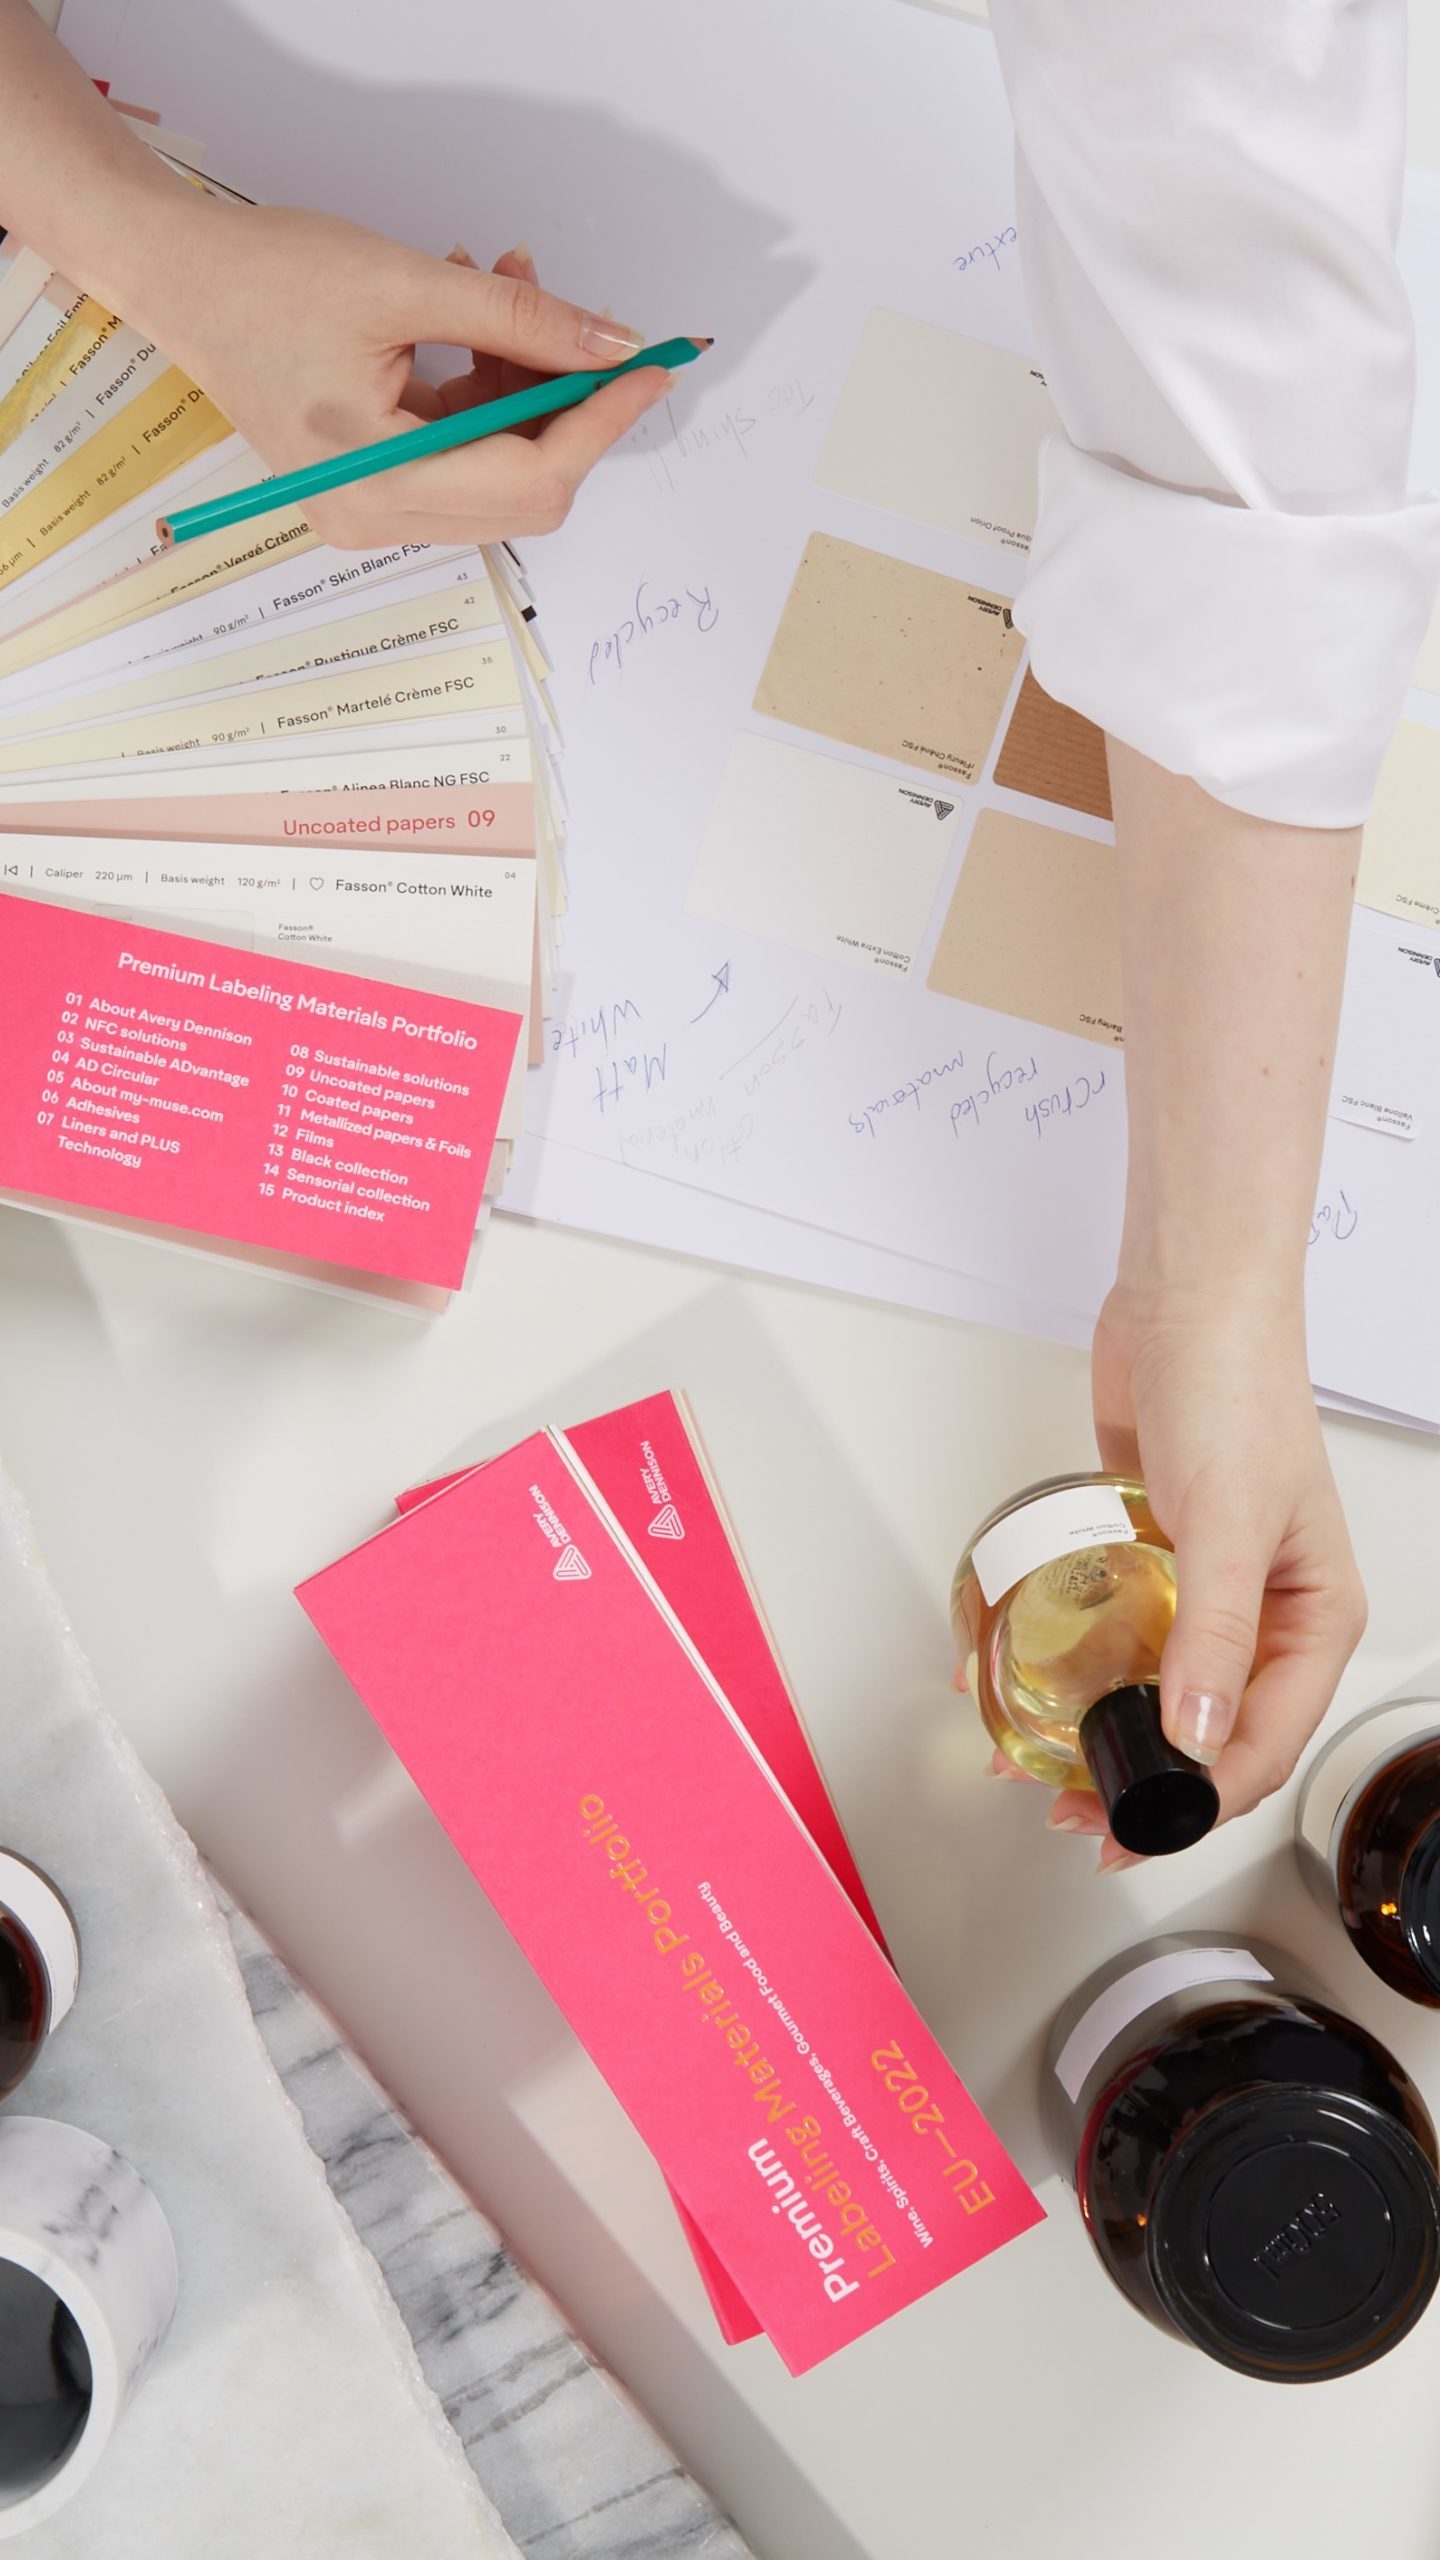 A woman carefully applying a sticker to a bottle package on her neatly organized working table, surrounded by a color chart and a stack of brown packaging materials. Photographed by I Heart Studios.